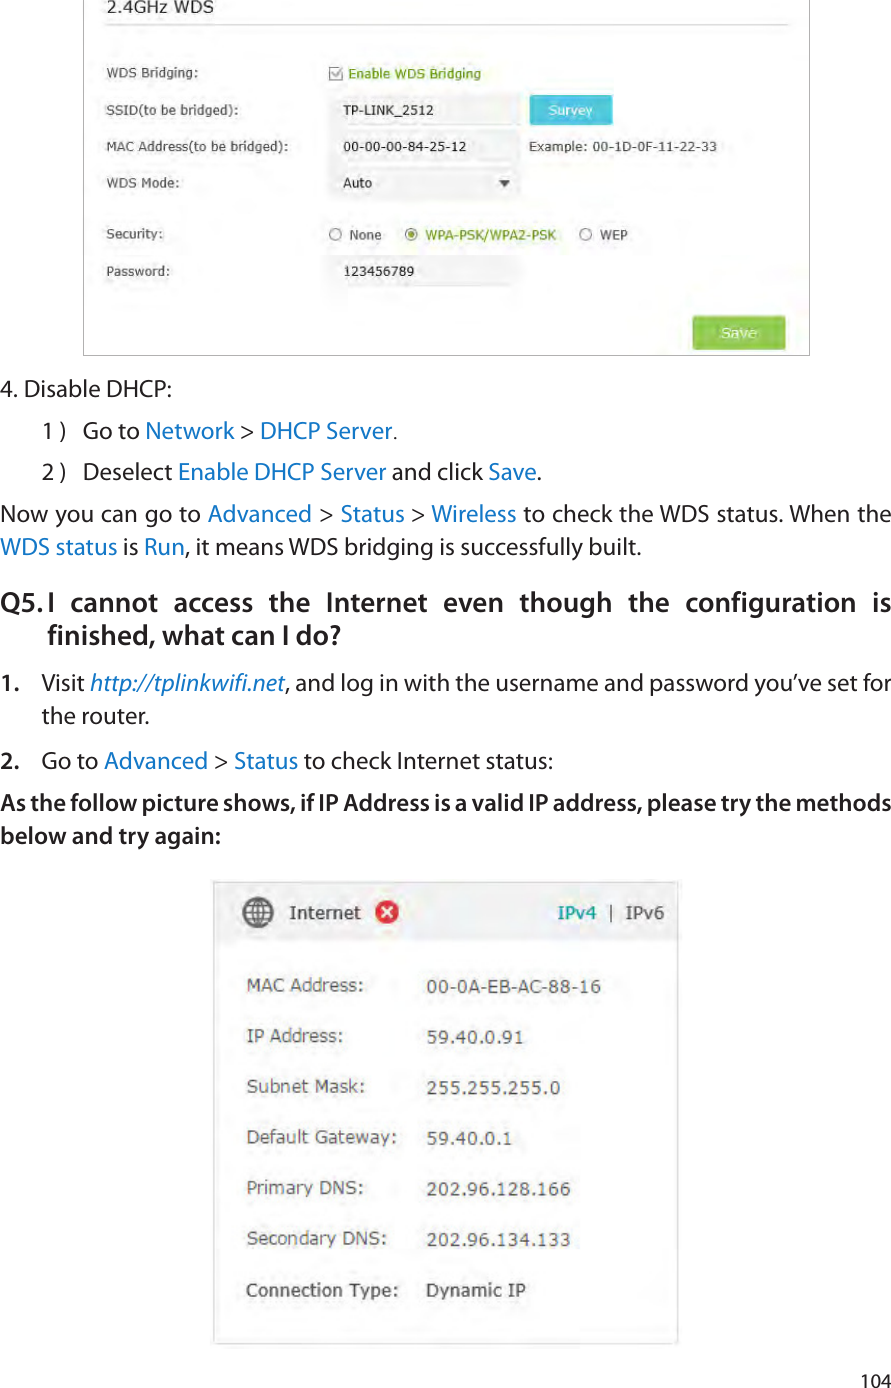 1044. Disable DHCP:1 )  Go to Network &gt; DHCP Server.2 )  Deselect Enable DHCP Server and click Save.Now you can go to Advanced &gt; Status &gt; Wireless to check the WDS status. When the WDS status is Run, it means WDS bridging is successfully built.Q5. I cannot access the Internet even though the configuration is finished, what can I do?1.  Visit http://tplinkwifi.net, and log in with the username and password you’ve set for the router.2.  Go to Advanced &gt; Status to check Internet status:As the follow picture shows, if IP Address is a valid IP address, please try the methods below and try again: